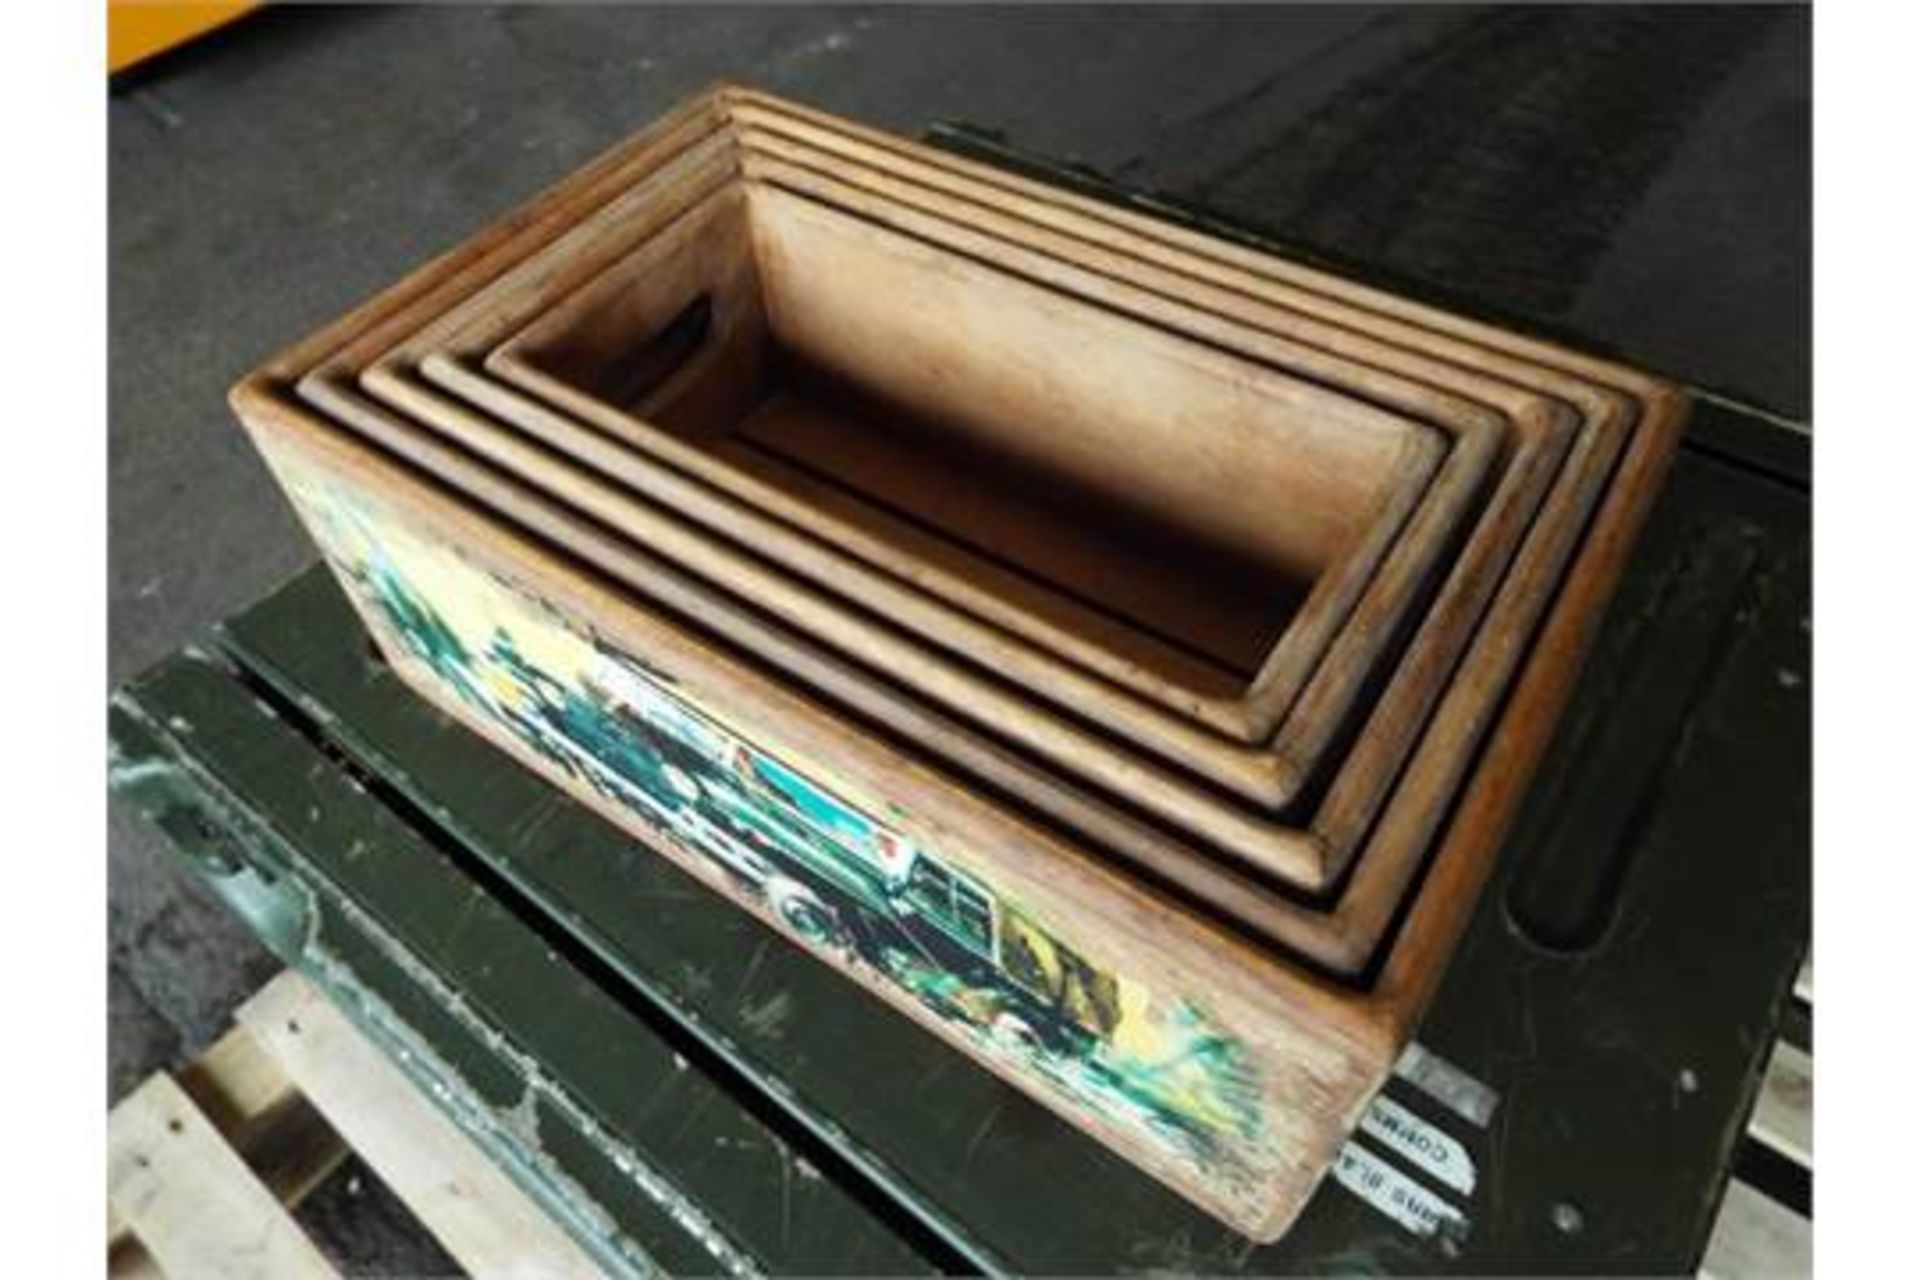 5 x Land Rover Wooden Display / Storage Boxes - Image 7 of 7